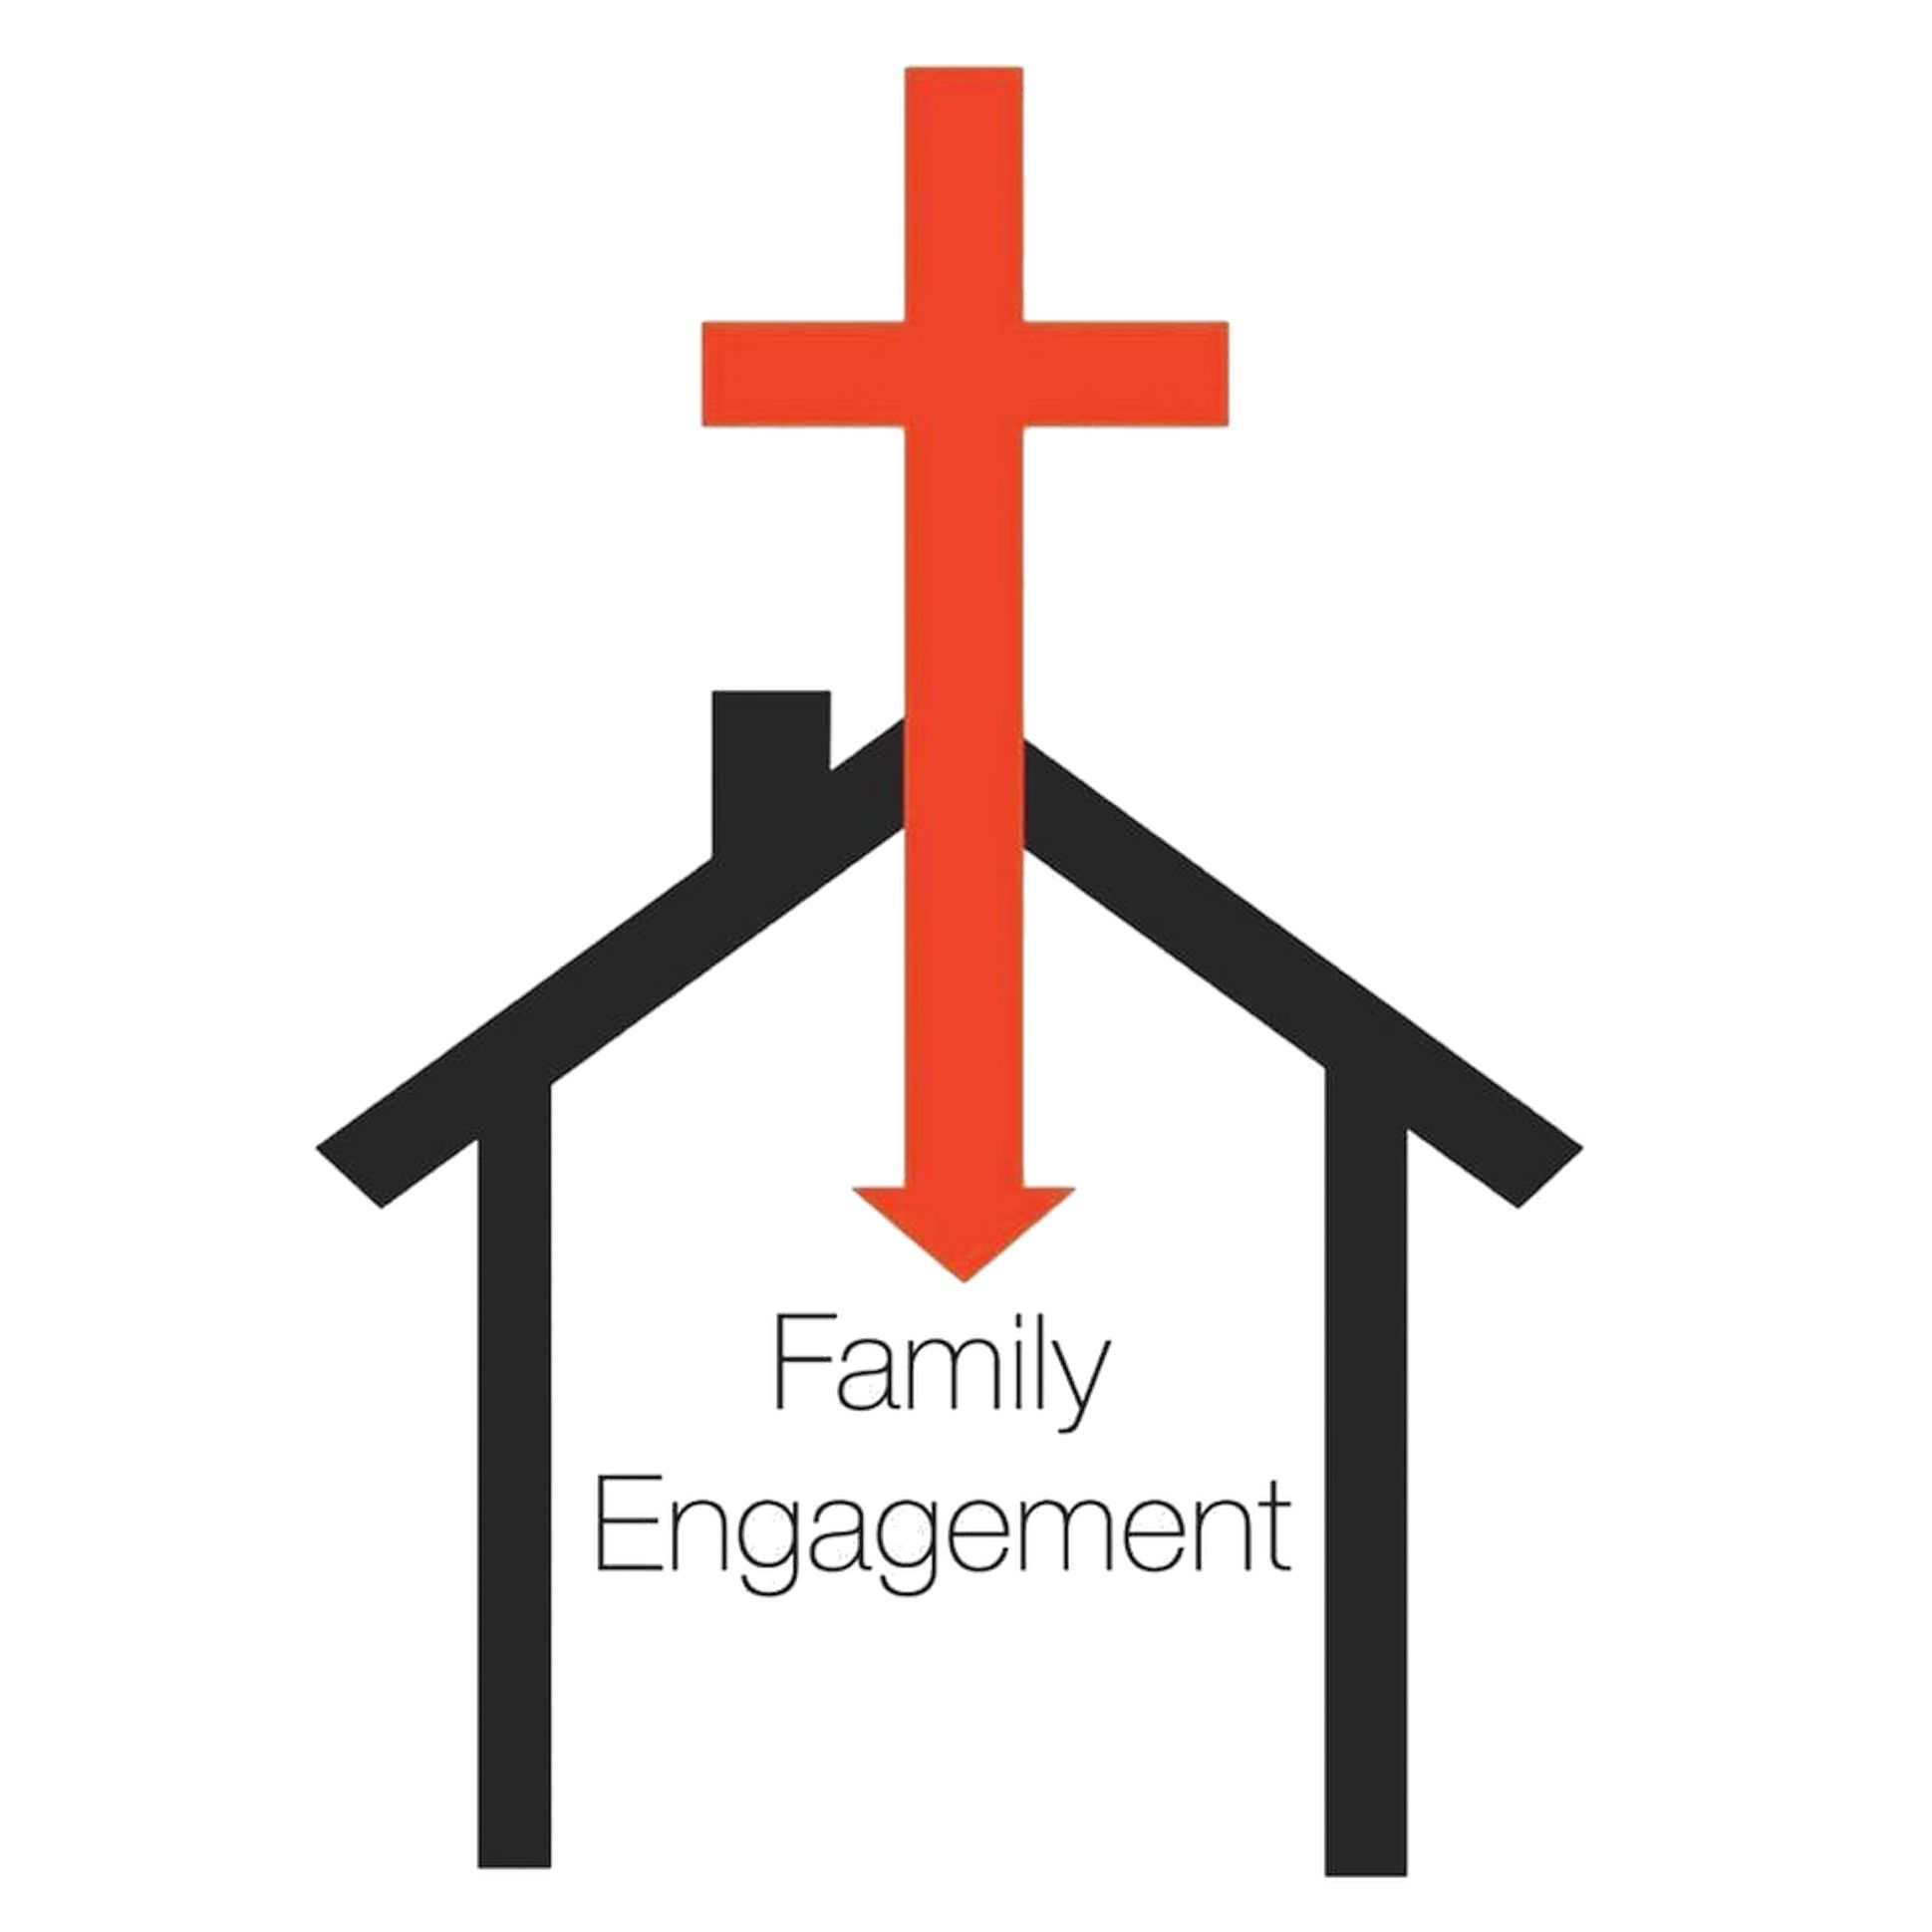 FAMILY ENGAGEMENT